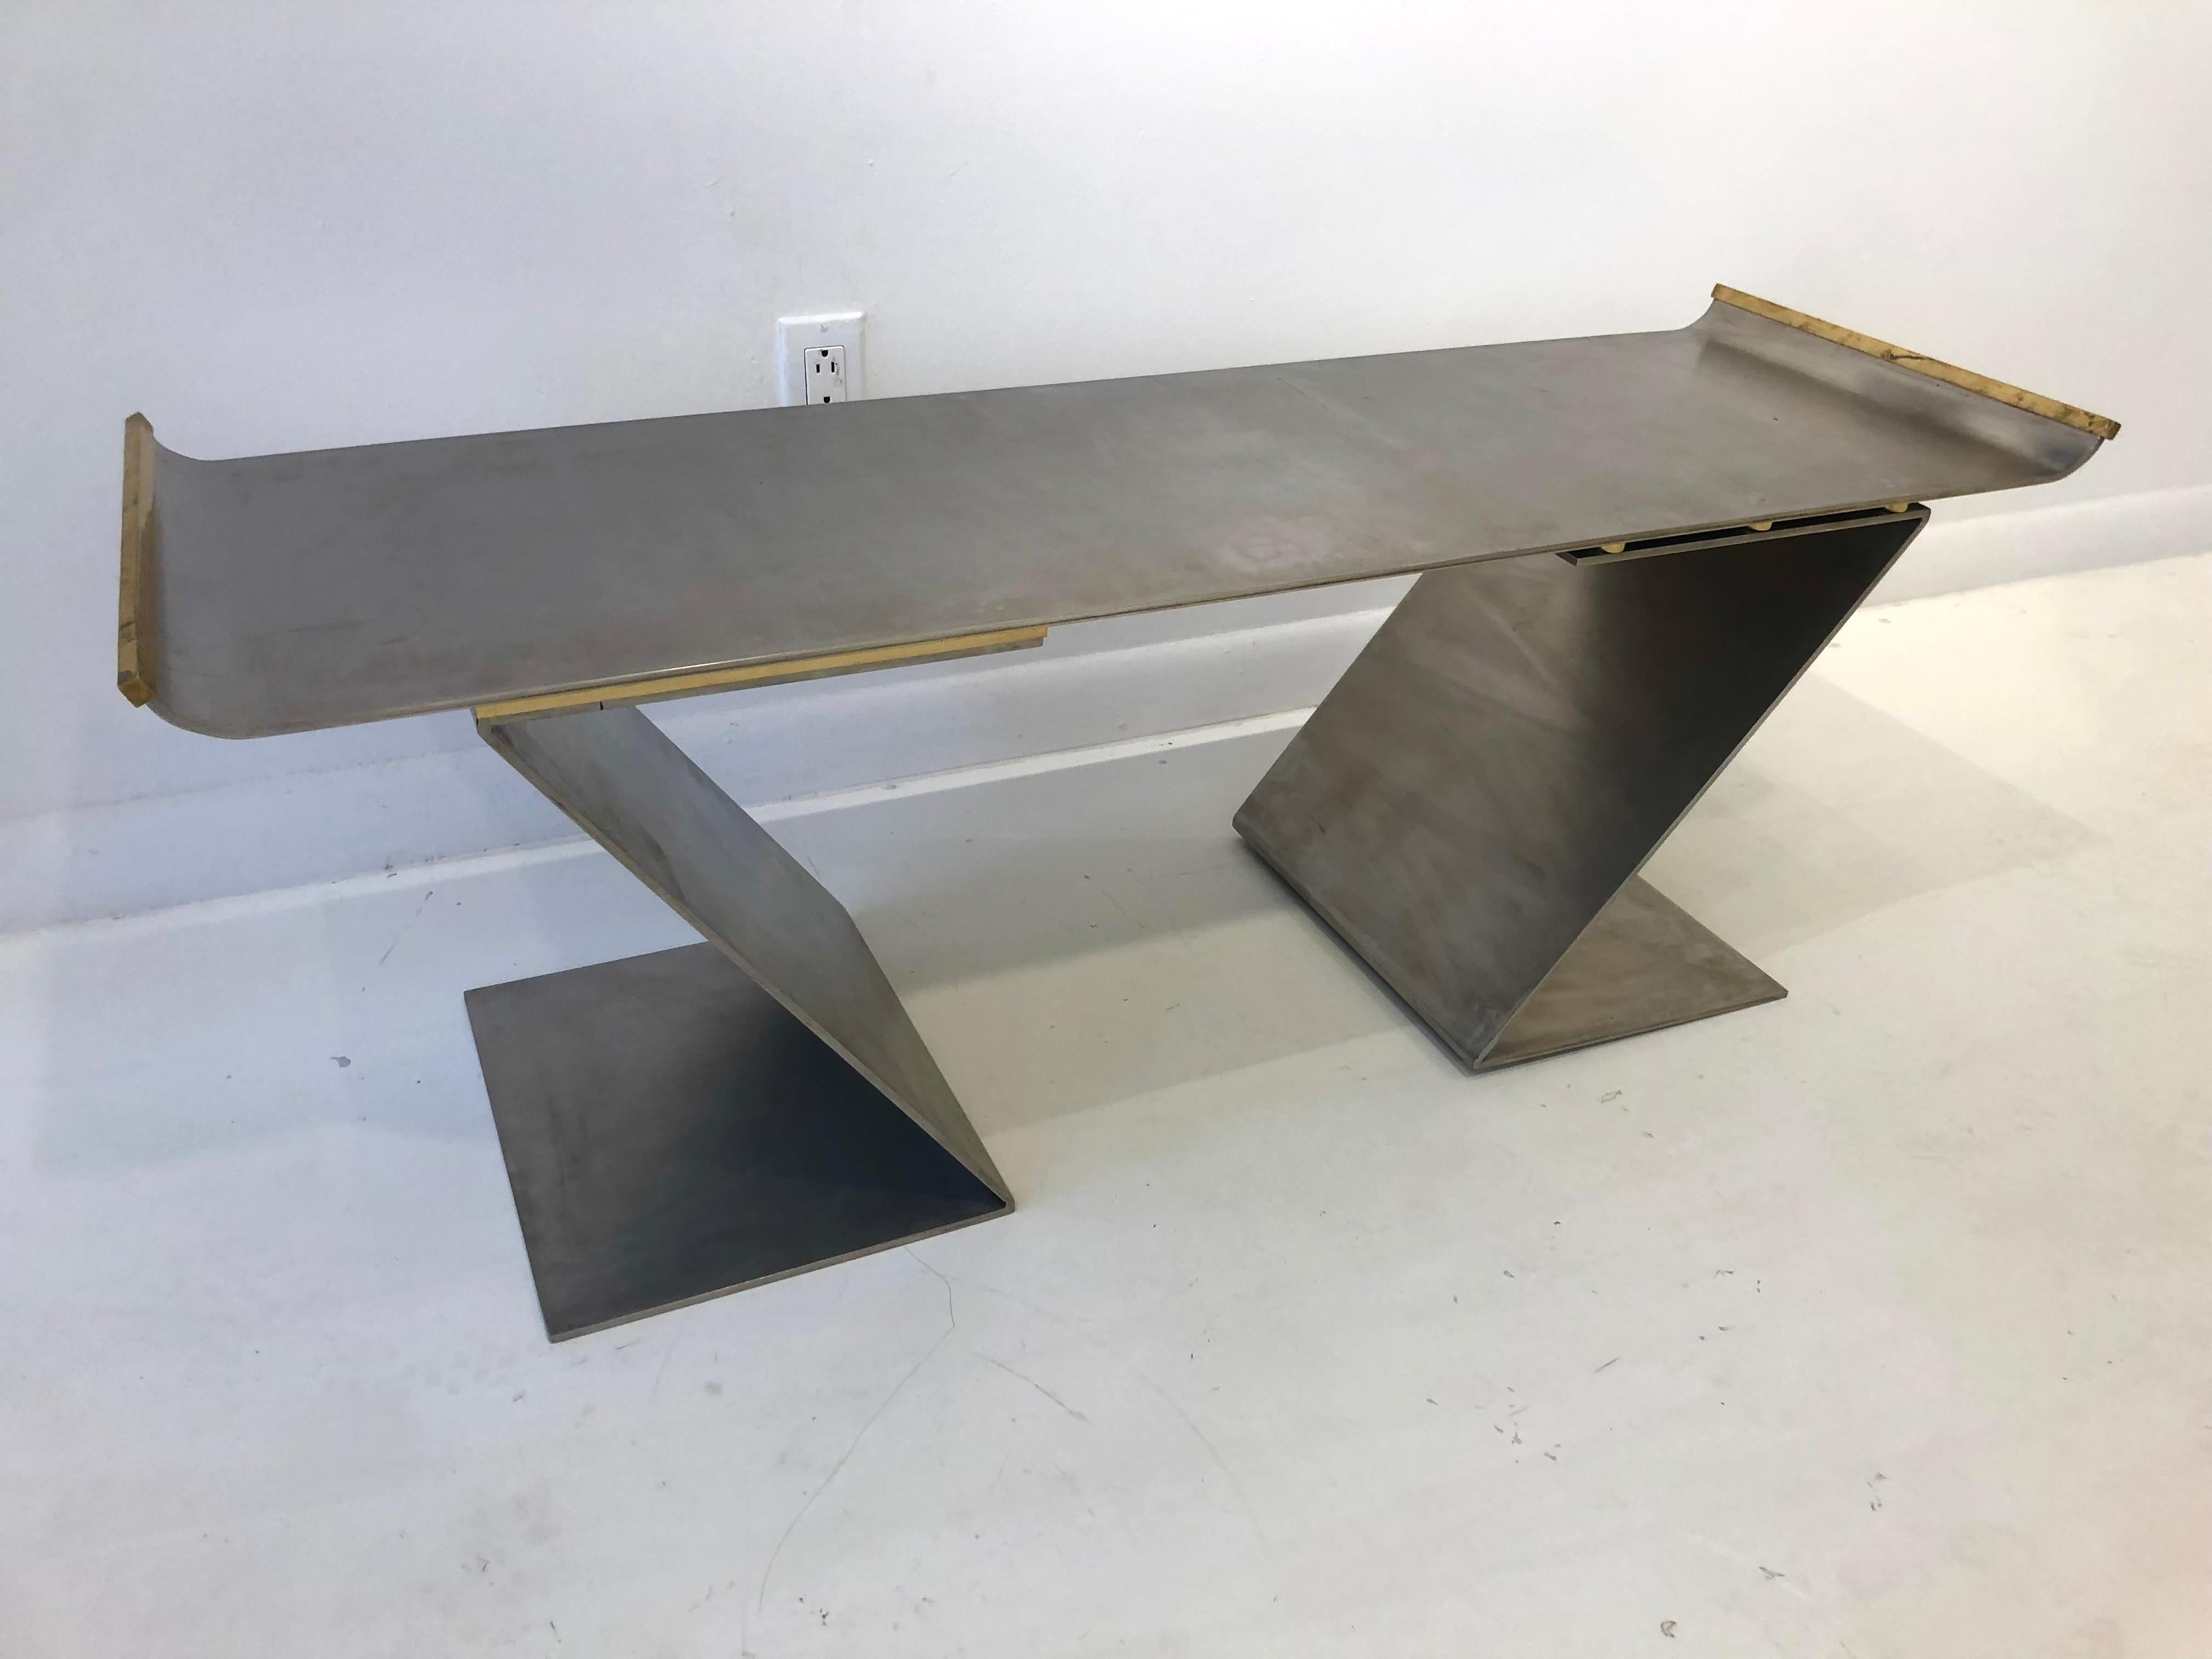 Beautiful and elegant minimalist design. Heavy gauge steel with bronze details is masterfully bent into sculptural form. Labeled and dated 1992 with the name Waal Fathi, possibly the name of the client or architect. Very heavy and impeccable